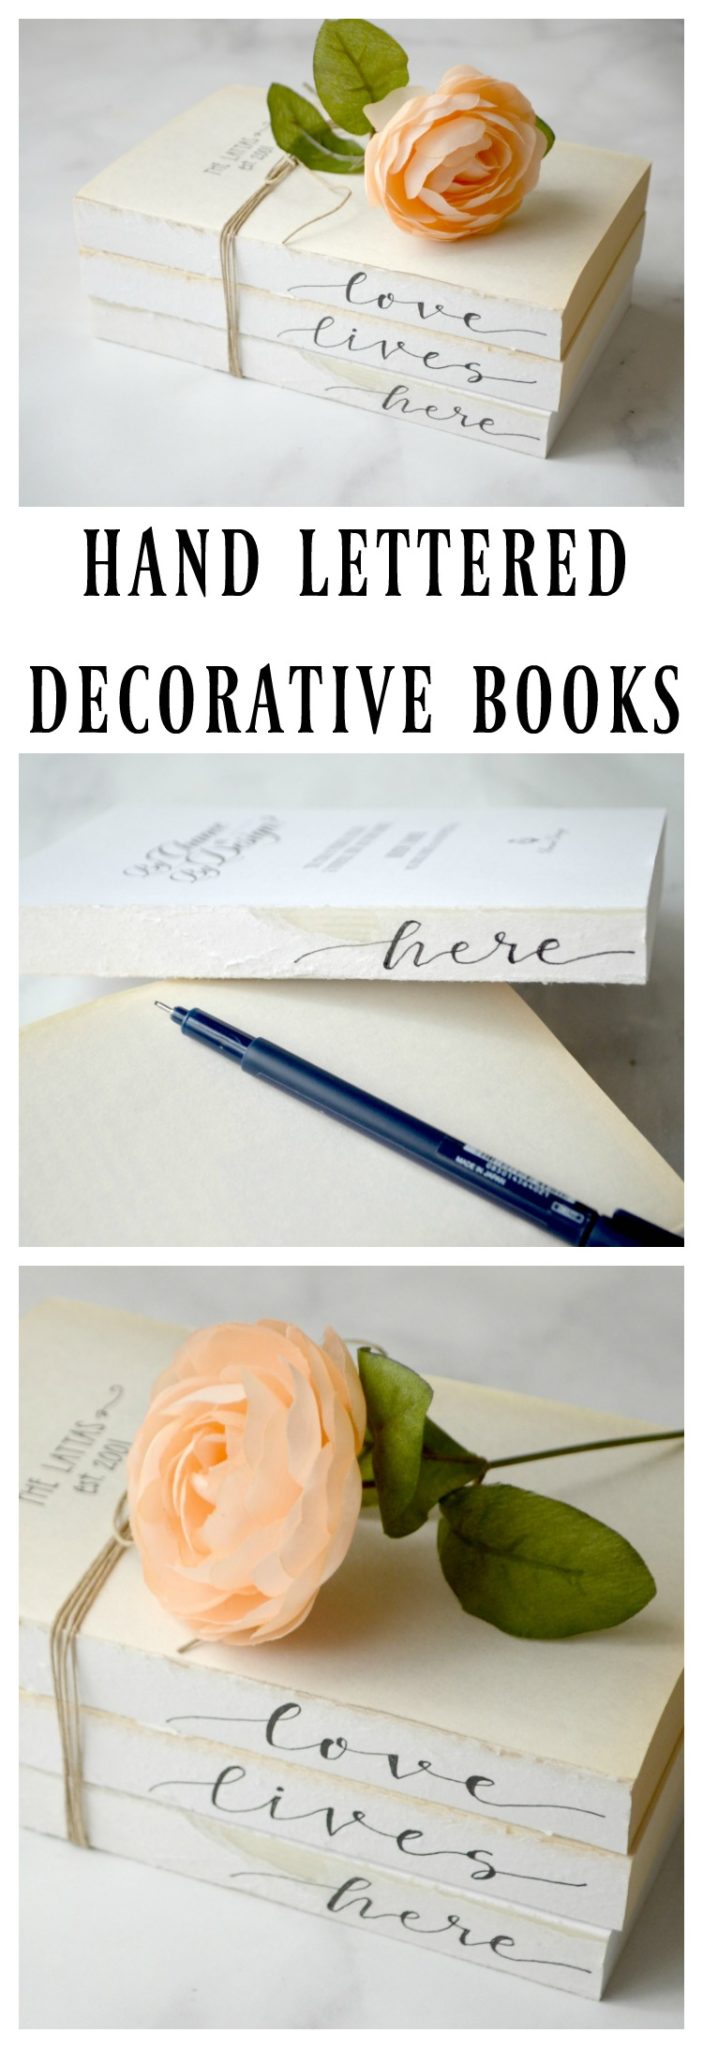 Hand Lettered Decorative Books